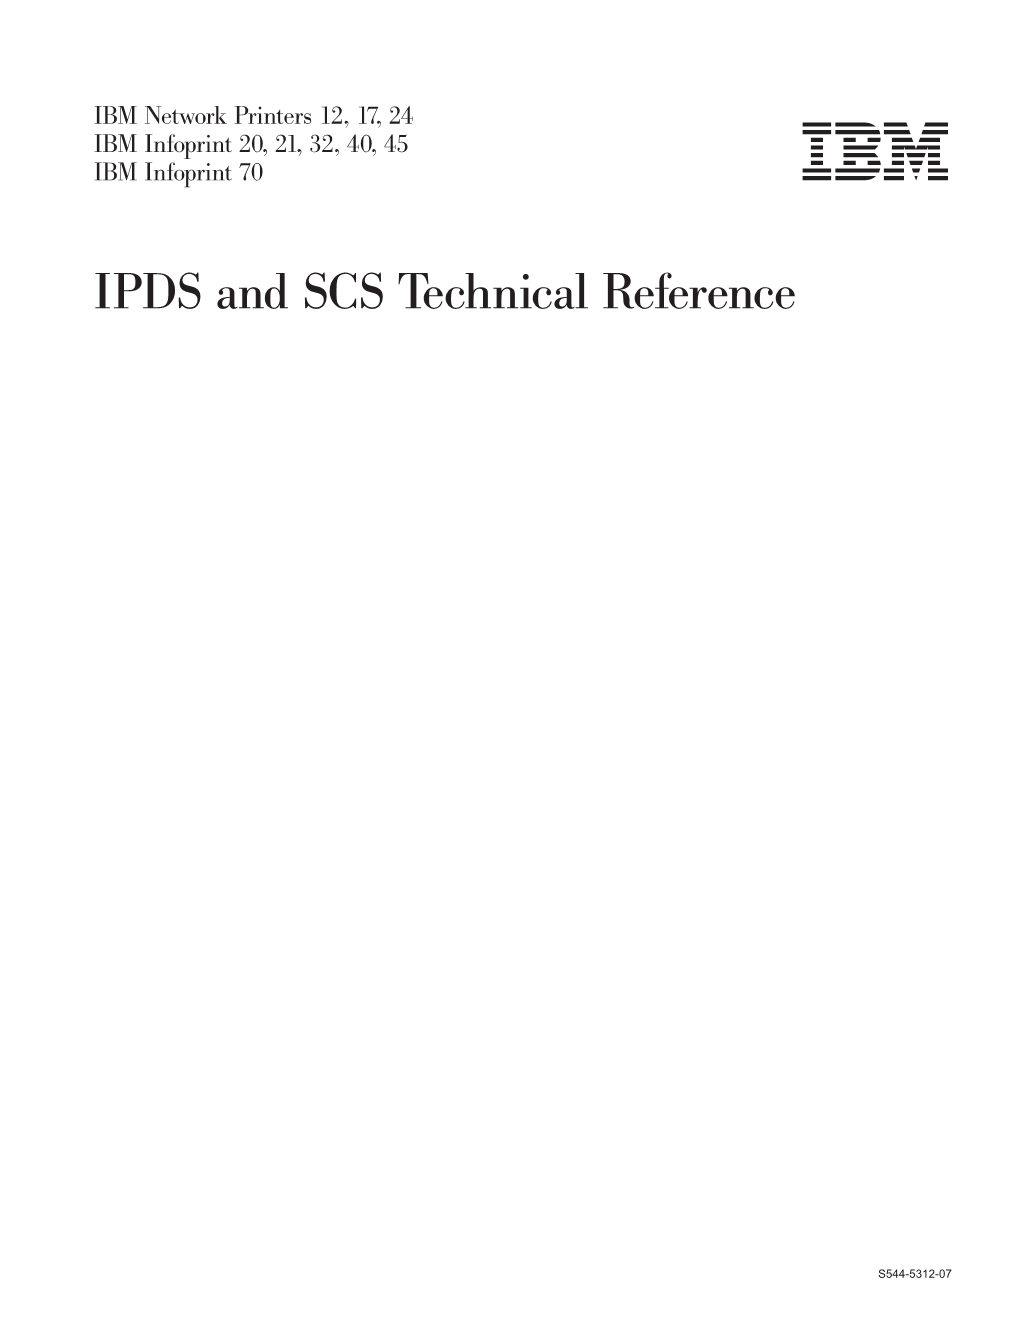 IPDS and SCS Technical Reference